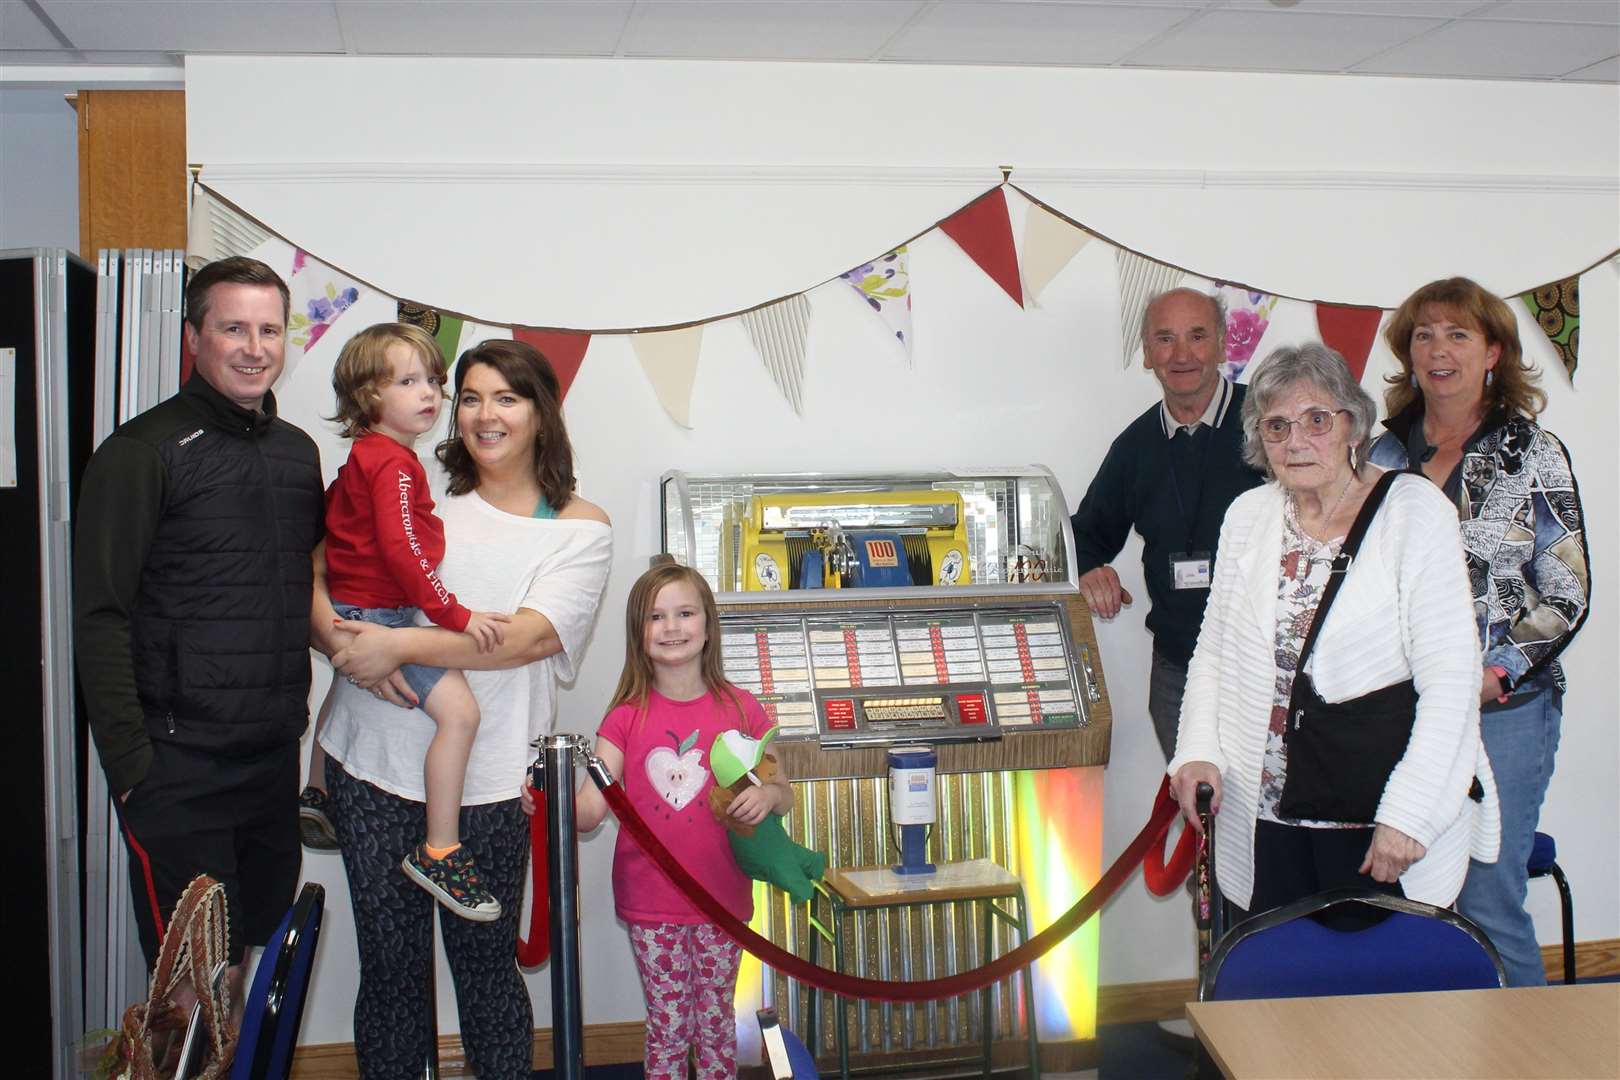 Garioch Heritage society member John Jessiman (third from right) shows off his 'jubilee jukebox ' to visitors to the Heritage centre's family fun and games day, Loco works road, Inverurie on Friday. Picture: Griselda McGregor